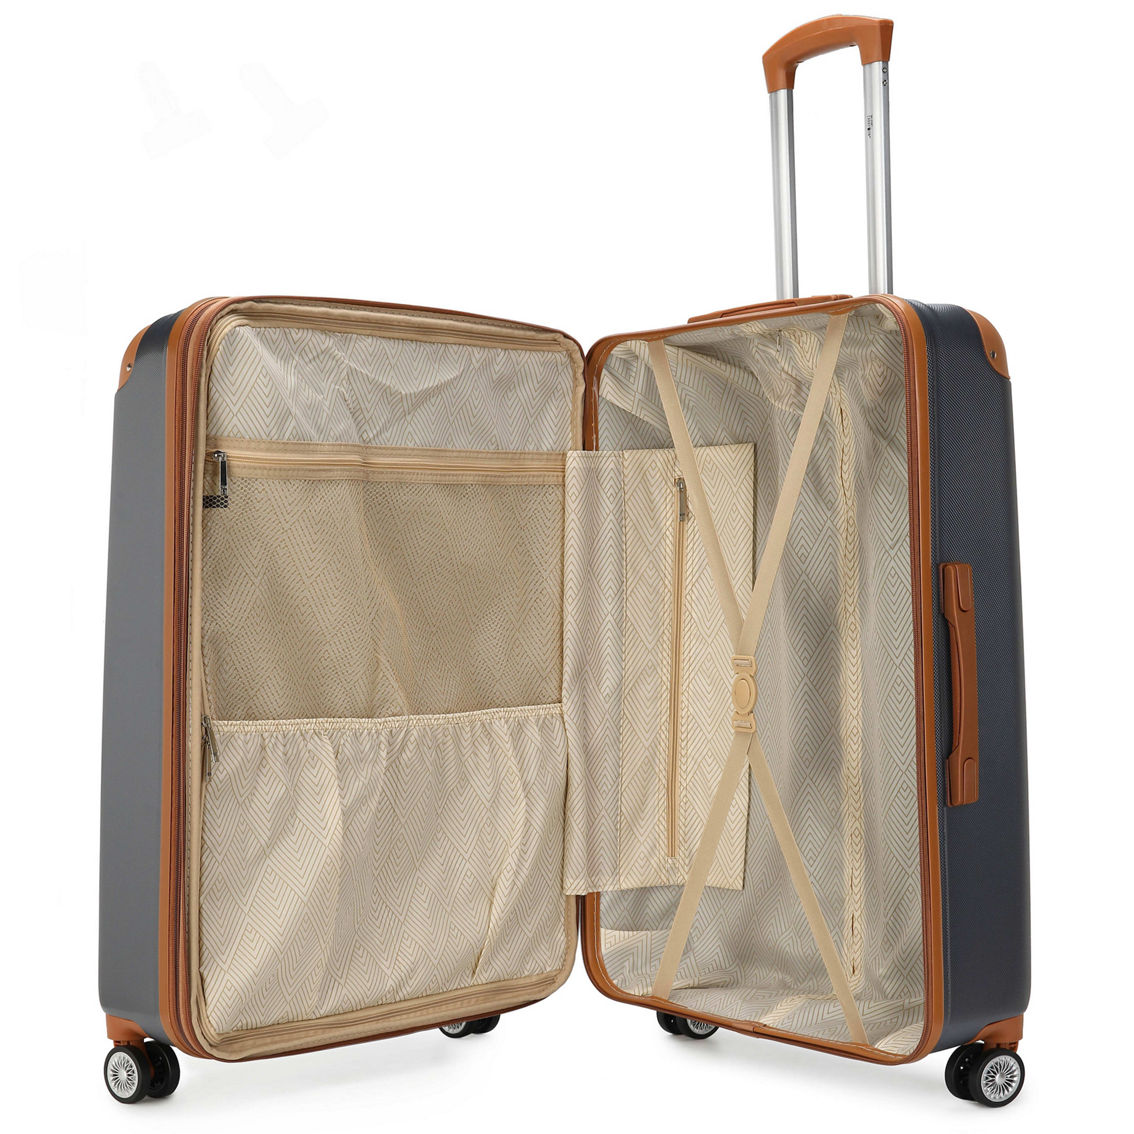 Miami CarryOn Collins 3 Piece Expandable Retro Spinner Luggage Set - Image 2 of 5